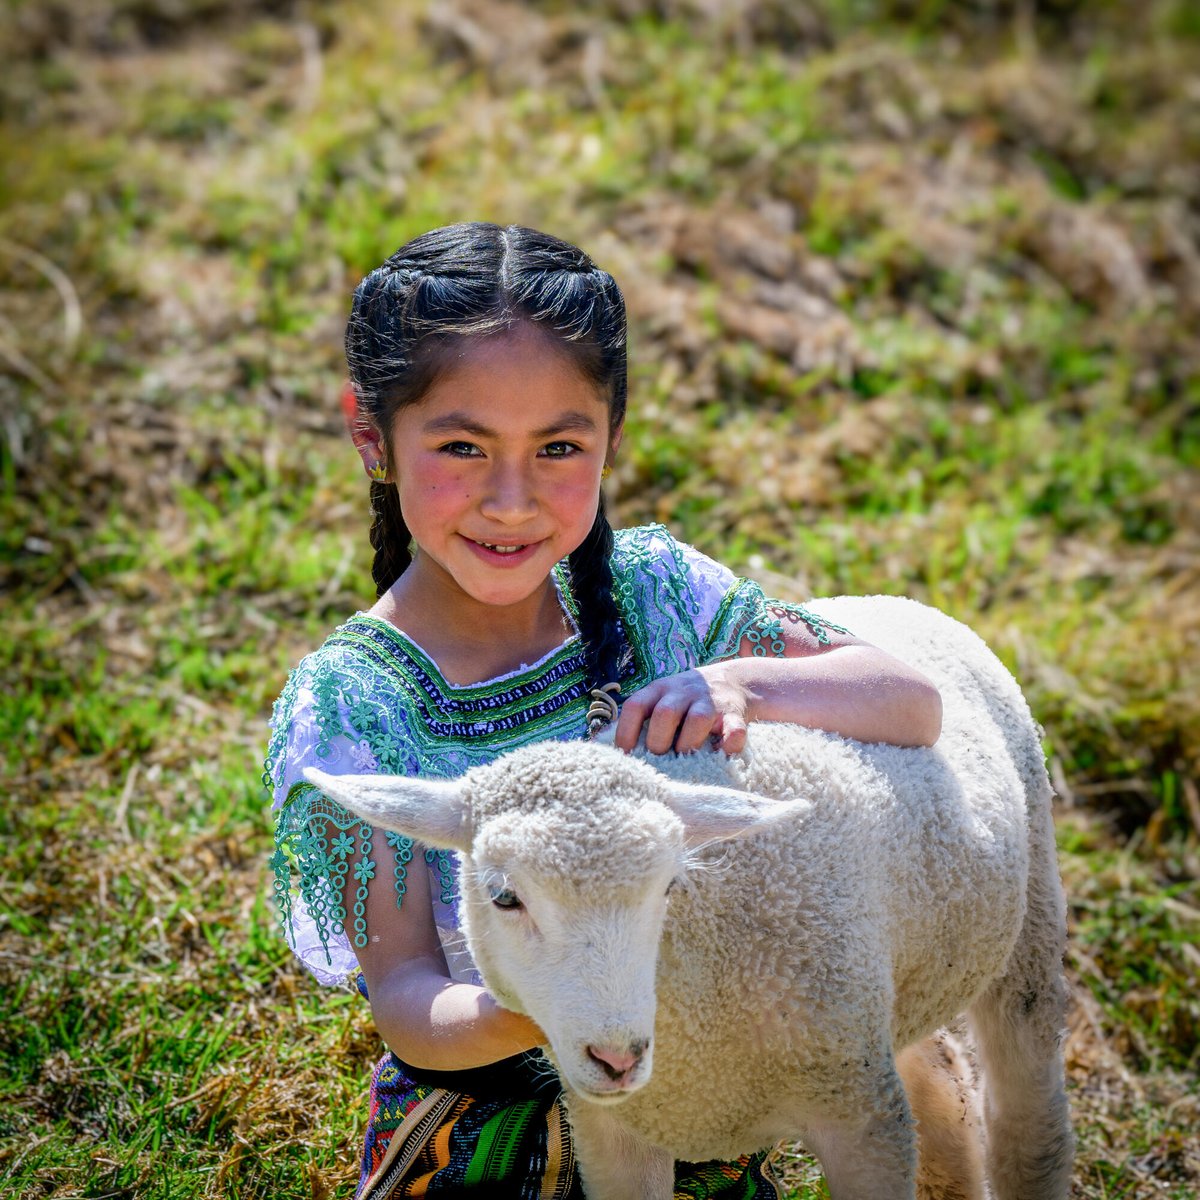 Every act of care nurtures a brighter future. Through sustainable farming initiatives, we're empowering communities to create lasting change. Together, let's sow seeds of hope for a hunger-free world. 🌱🐑 #SustainableFarming #EndChildHunger #ENOUGH